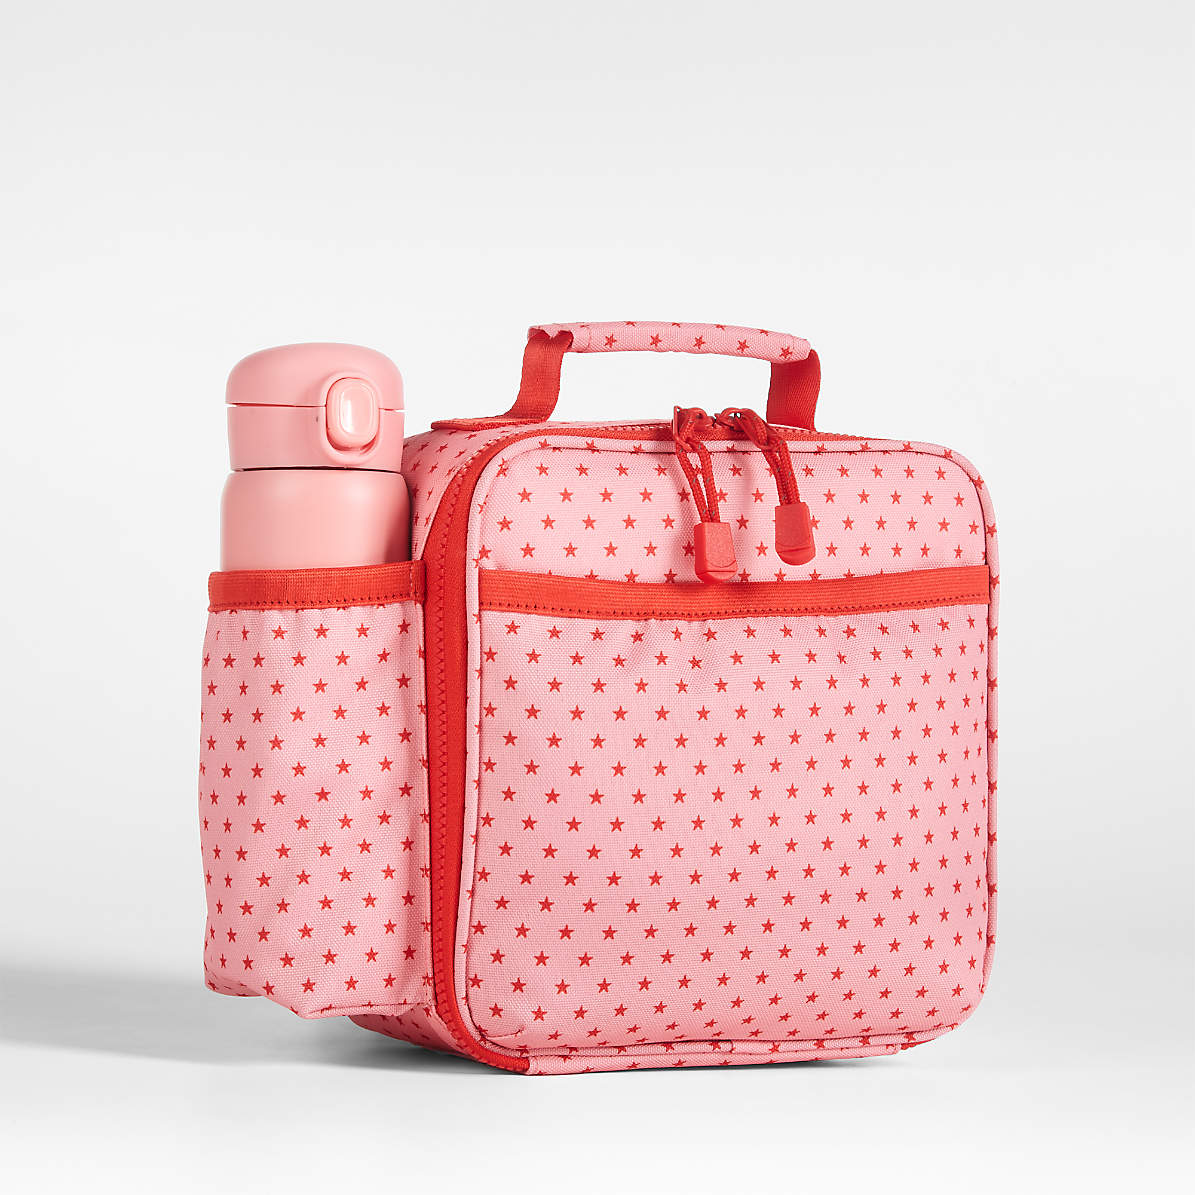 Thermos Kids' Athleisure Upright Lunch Bag - Red